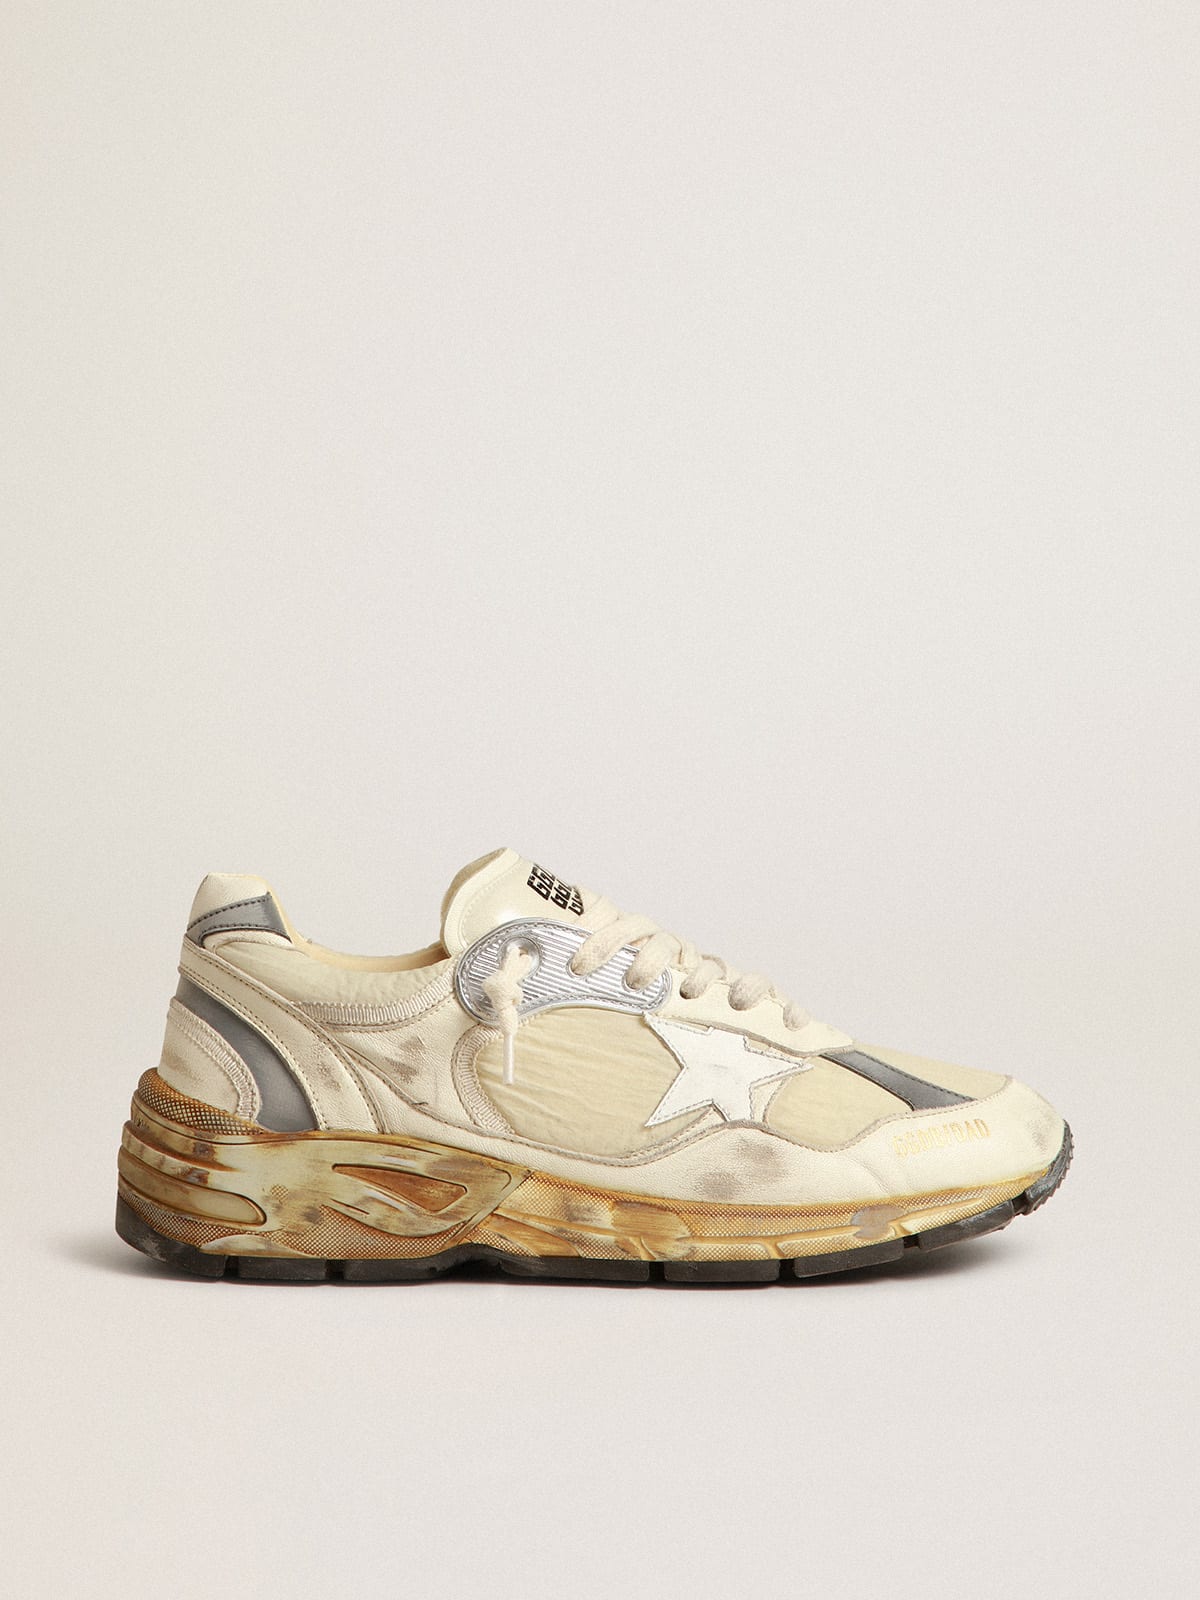 Golden Goose - Men’s Dad-Star in beige nappa and nylon with white leather star in 